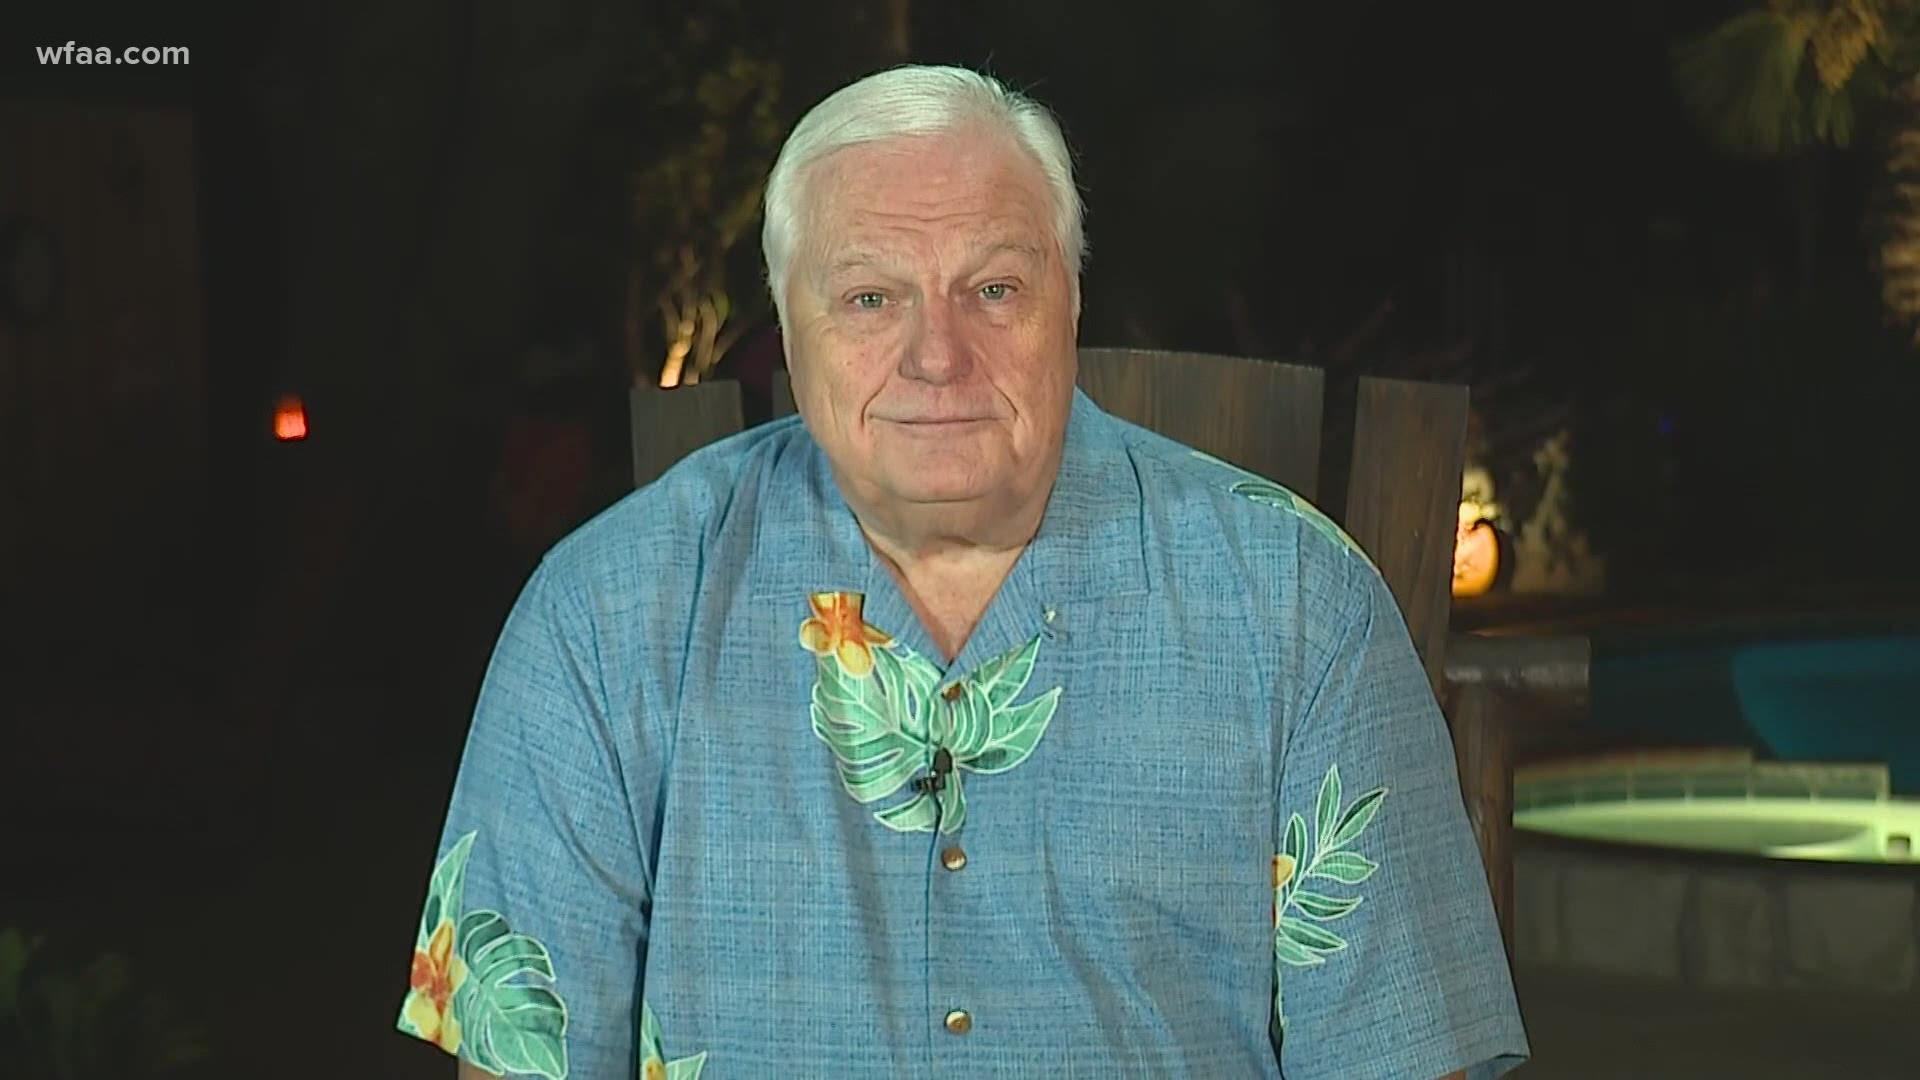 There are several years in our country's history that are much worse. But this is the worst year Dale Hansen says he's lived through.